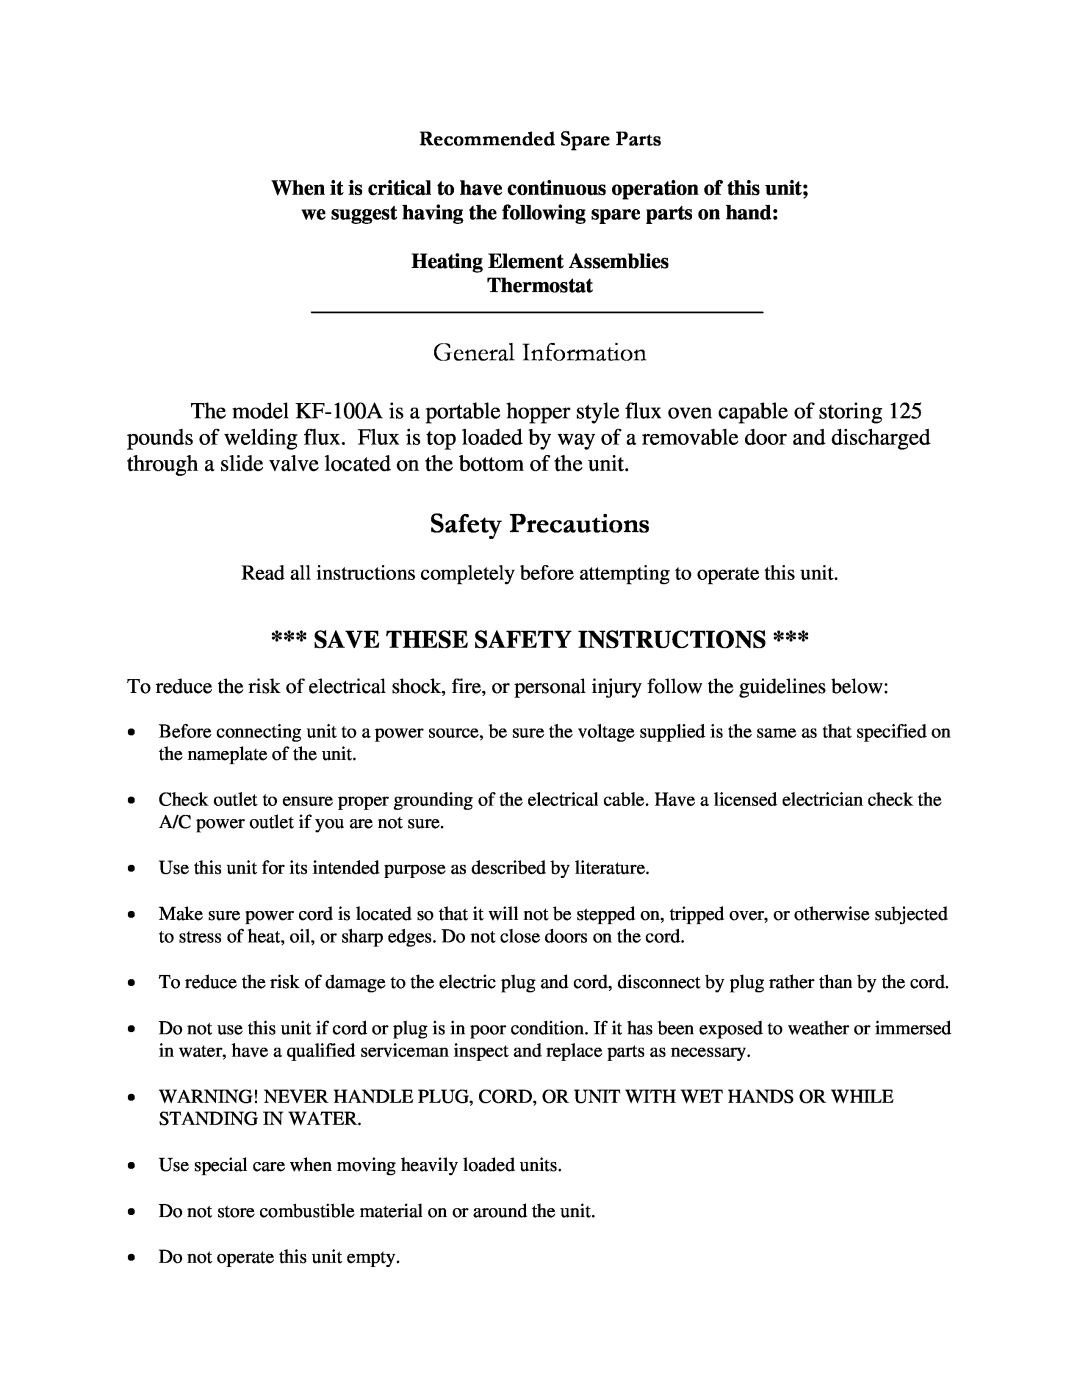 Henkel KF-100A manual Safety Precautions, General Information, Save These Safety Instructions, Recommended Spare Parts 